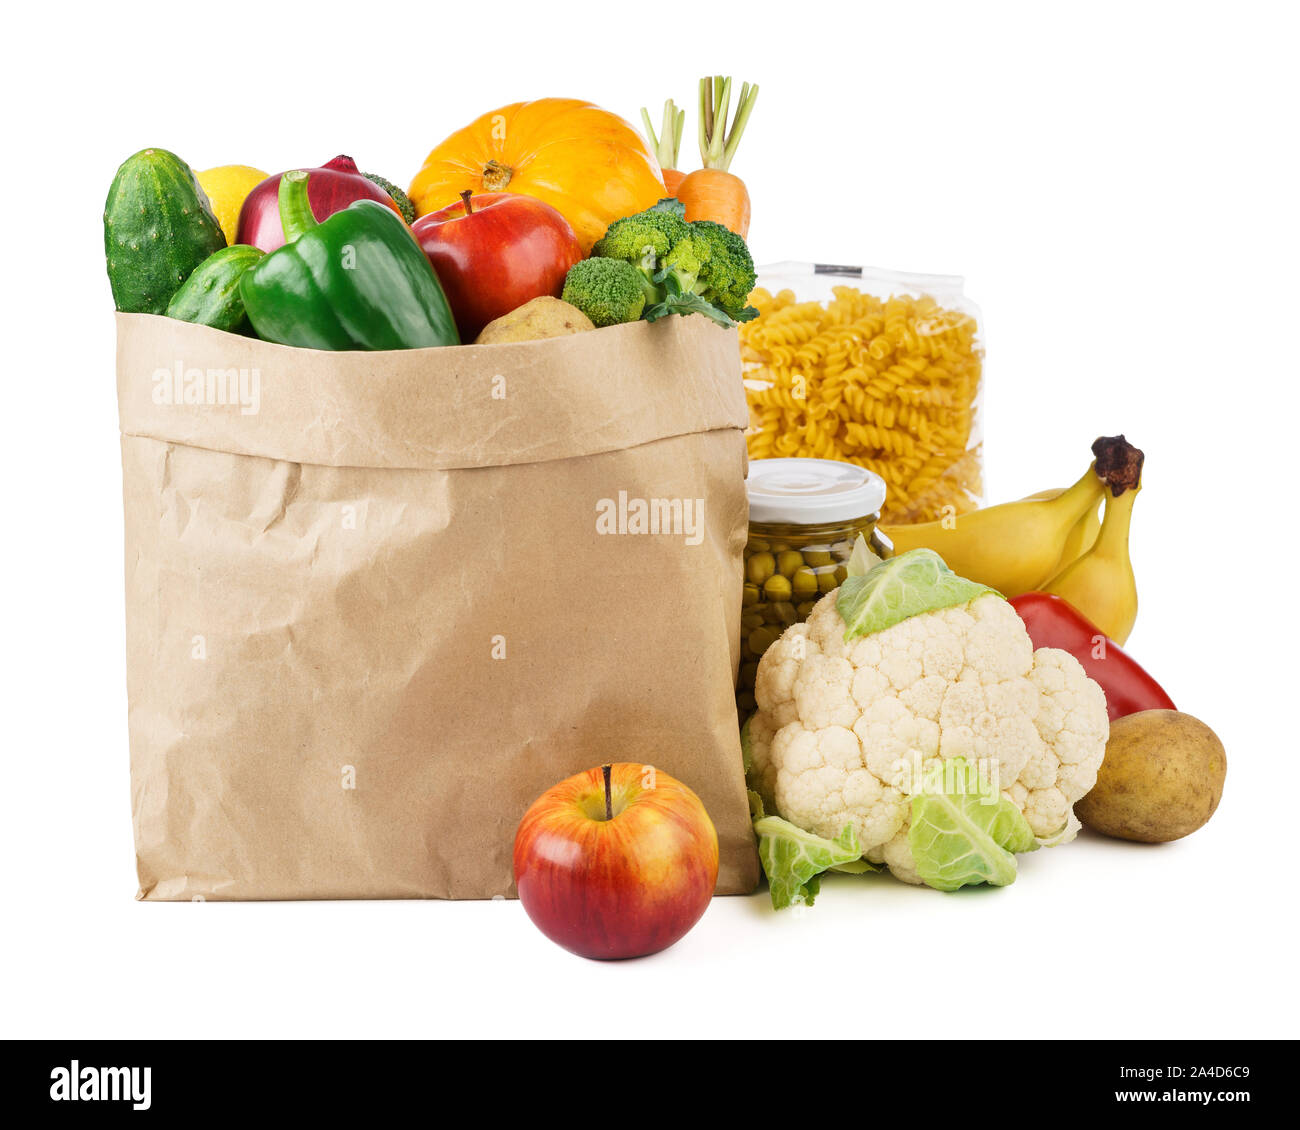 https://c8.alamy.com/comp/2A4D6C9/paper-bag-with-various-food-fresh-vegetables-fruits-canned-goods-and-bread-food-delivery-or-donations-2A4D6C9.jpg